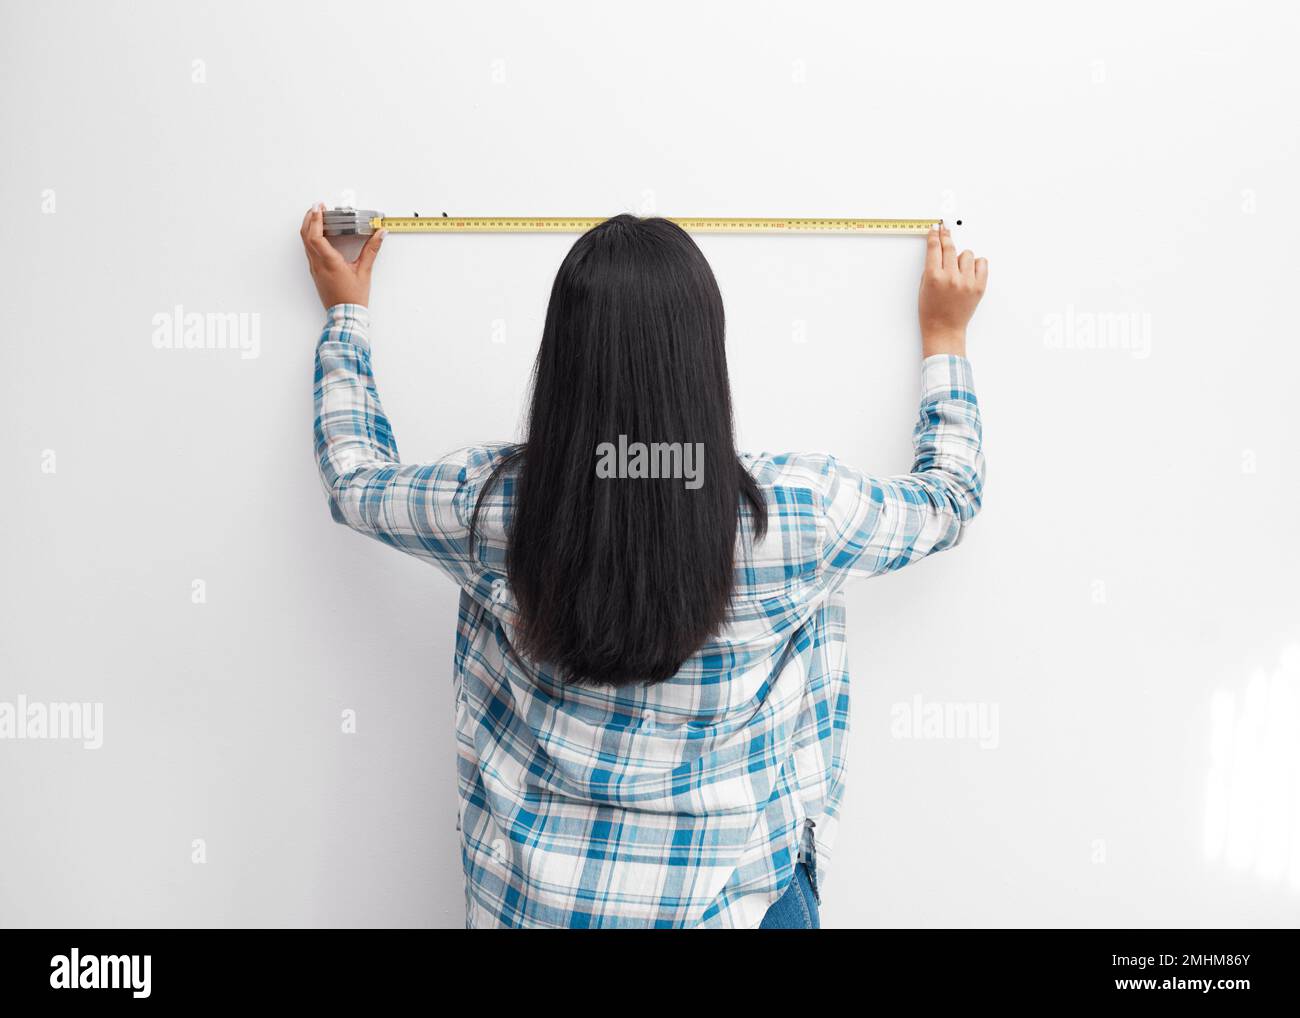 An Indian woman measures against the wall using measuring tape doing home DIY Stock Photo